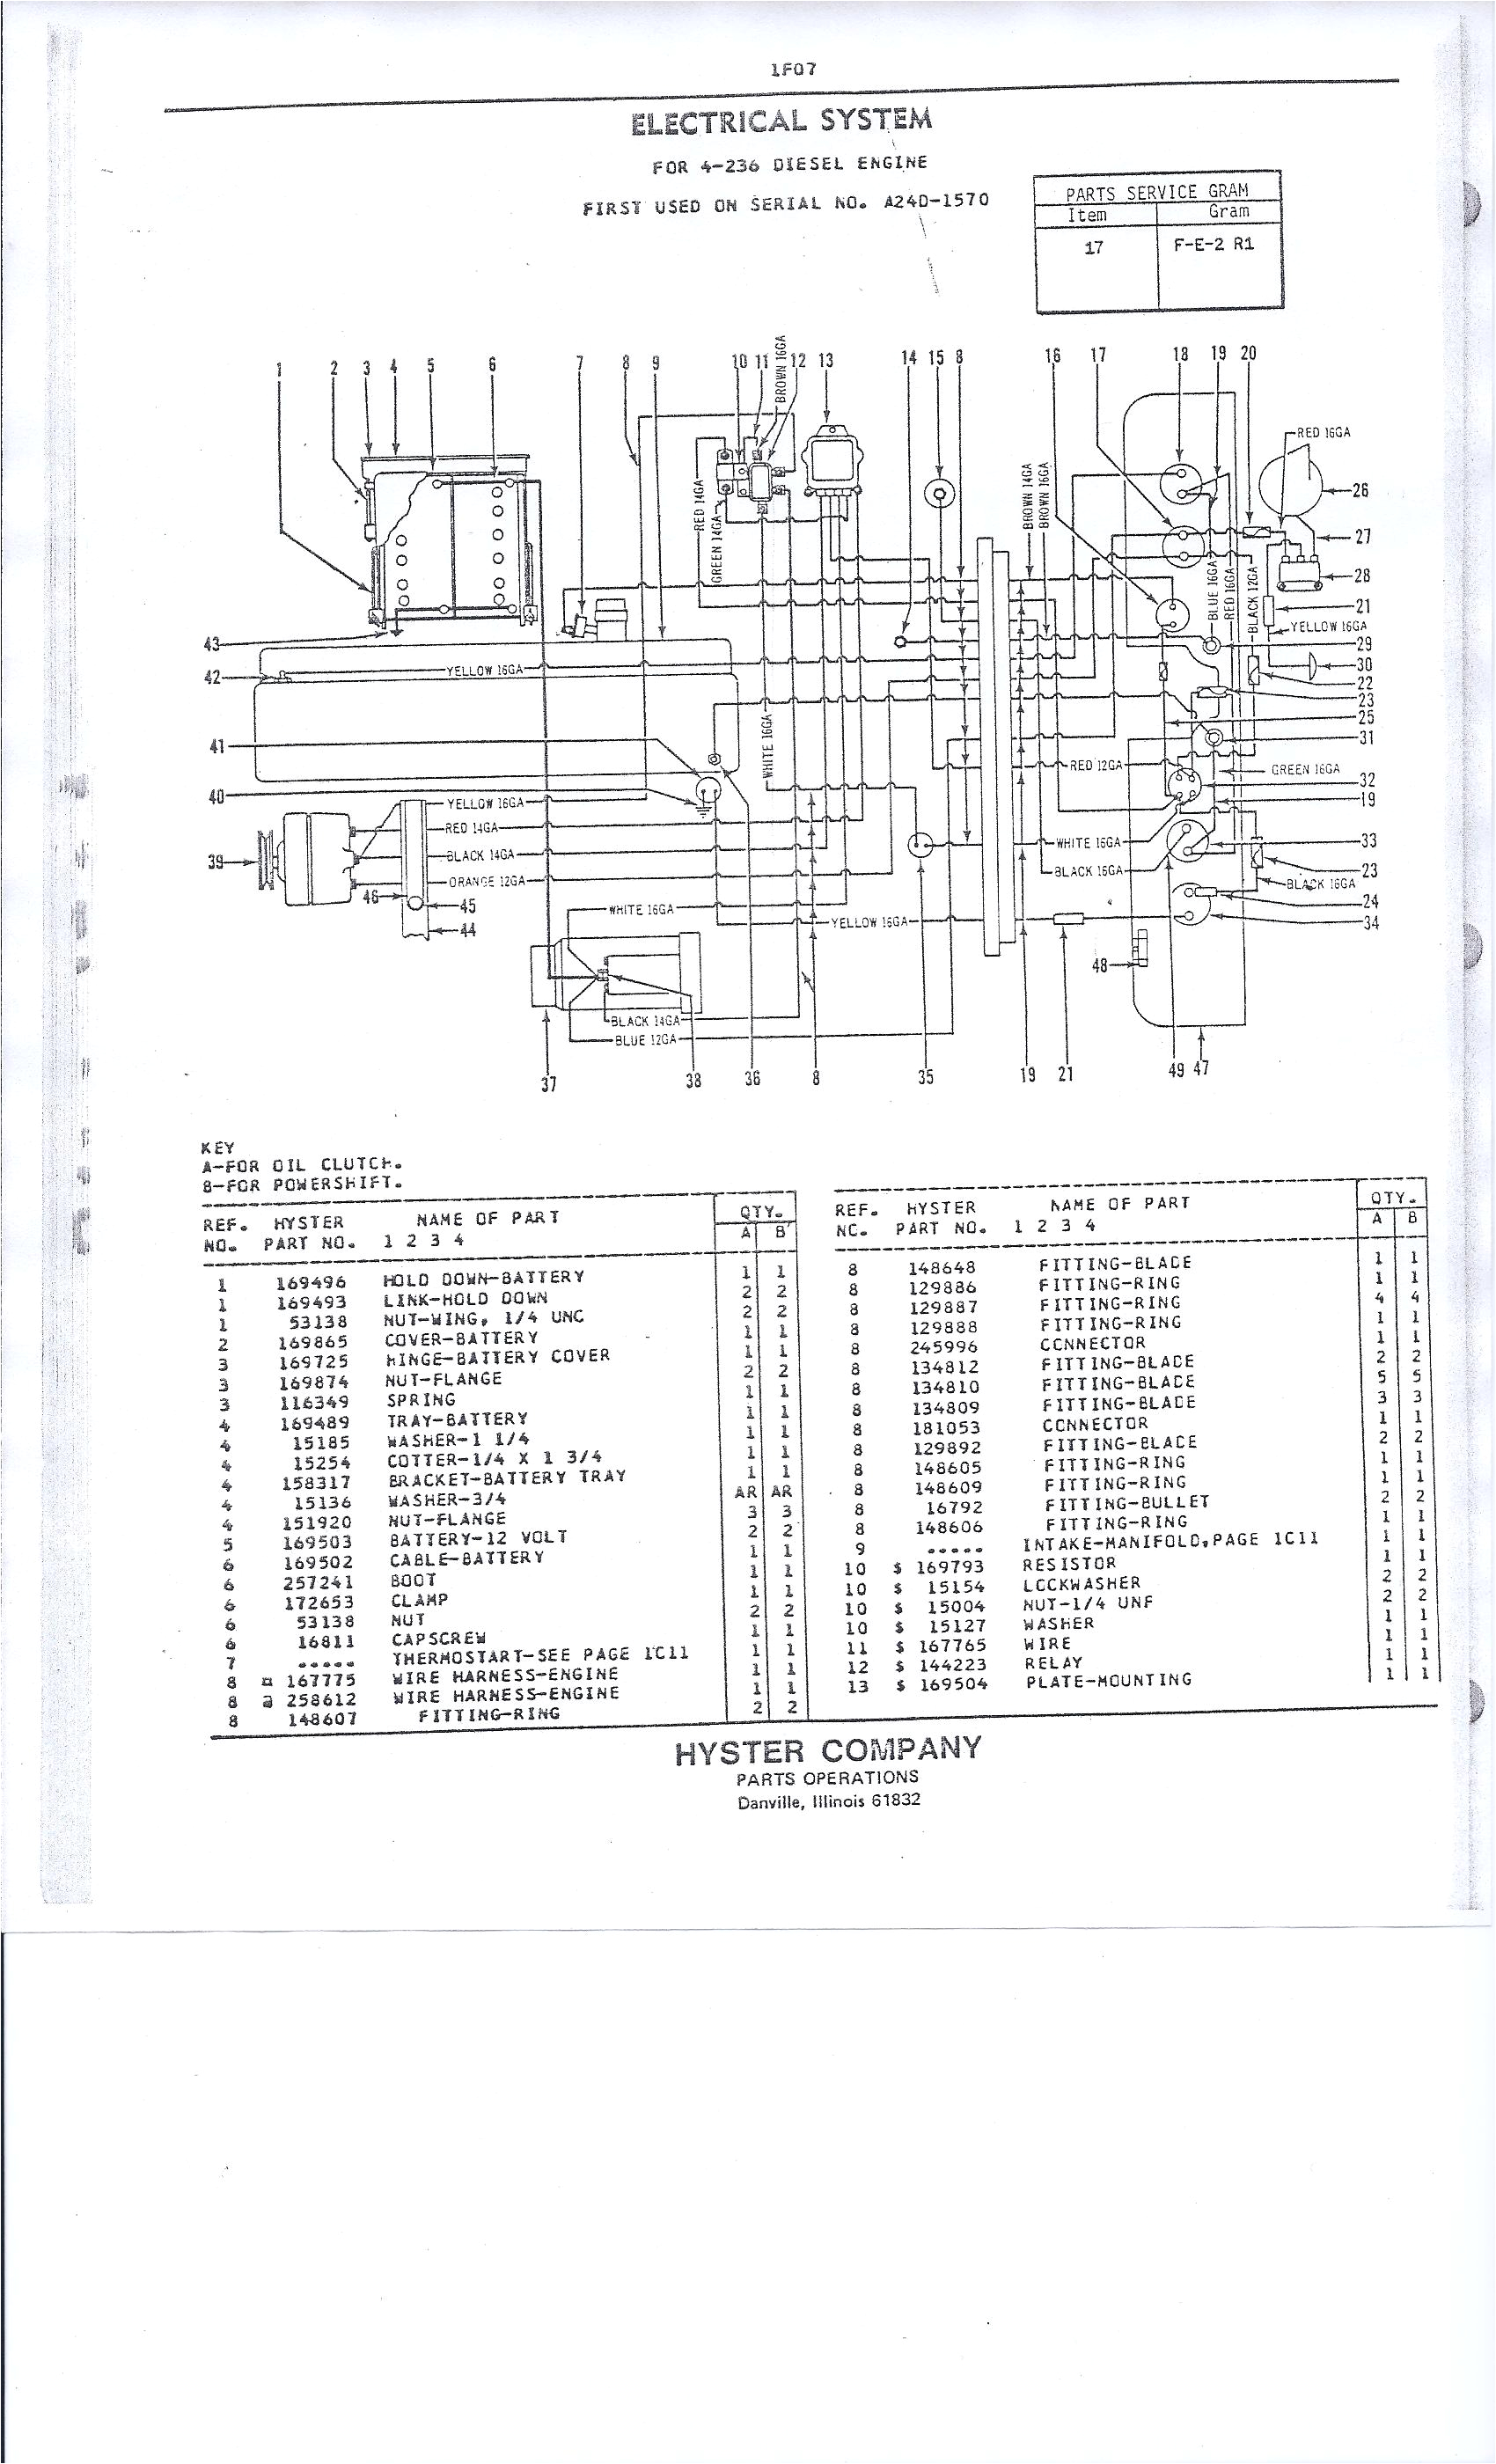 has anybody got a wiring diagram for hyster s 150 a 1986 many thanksgraphic graphic graphic